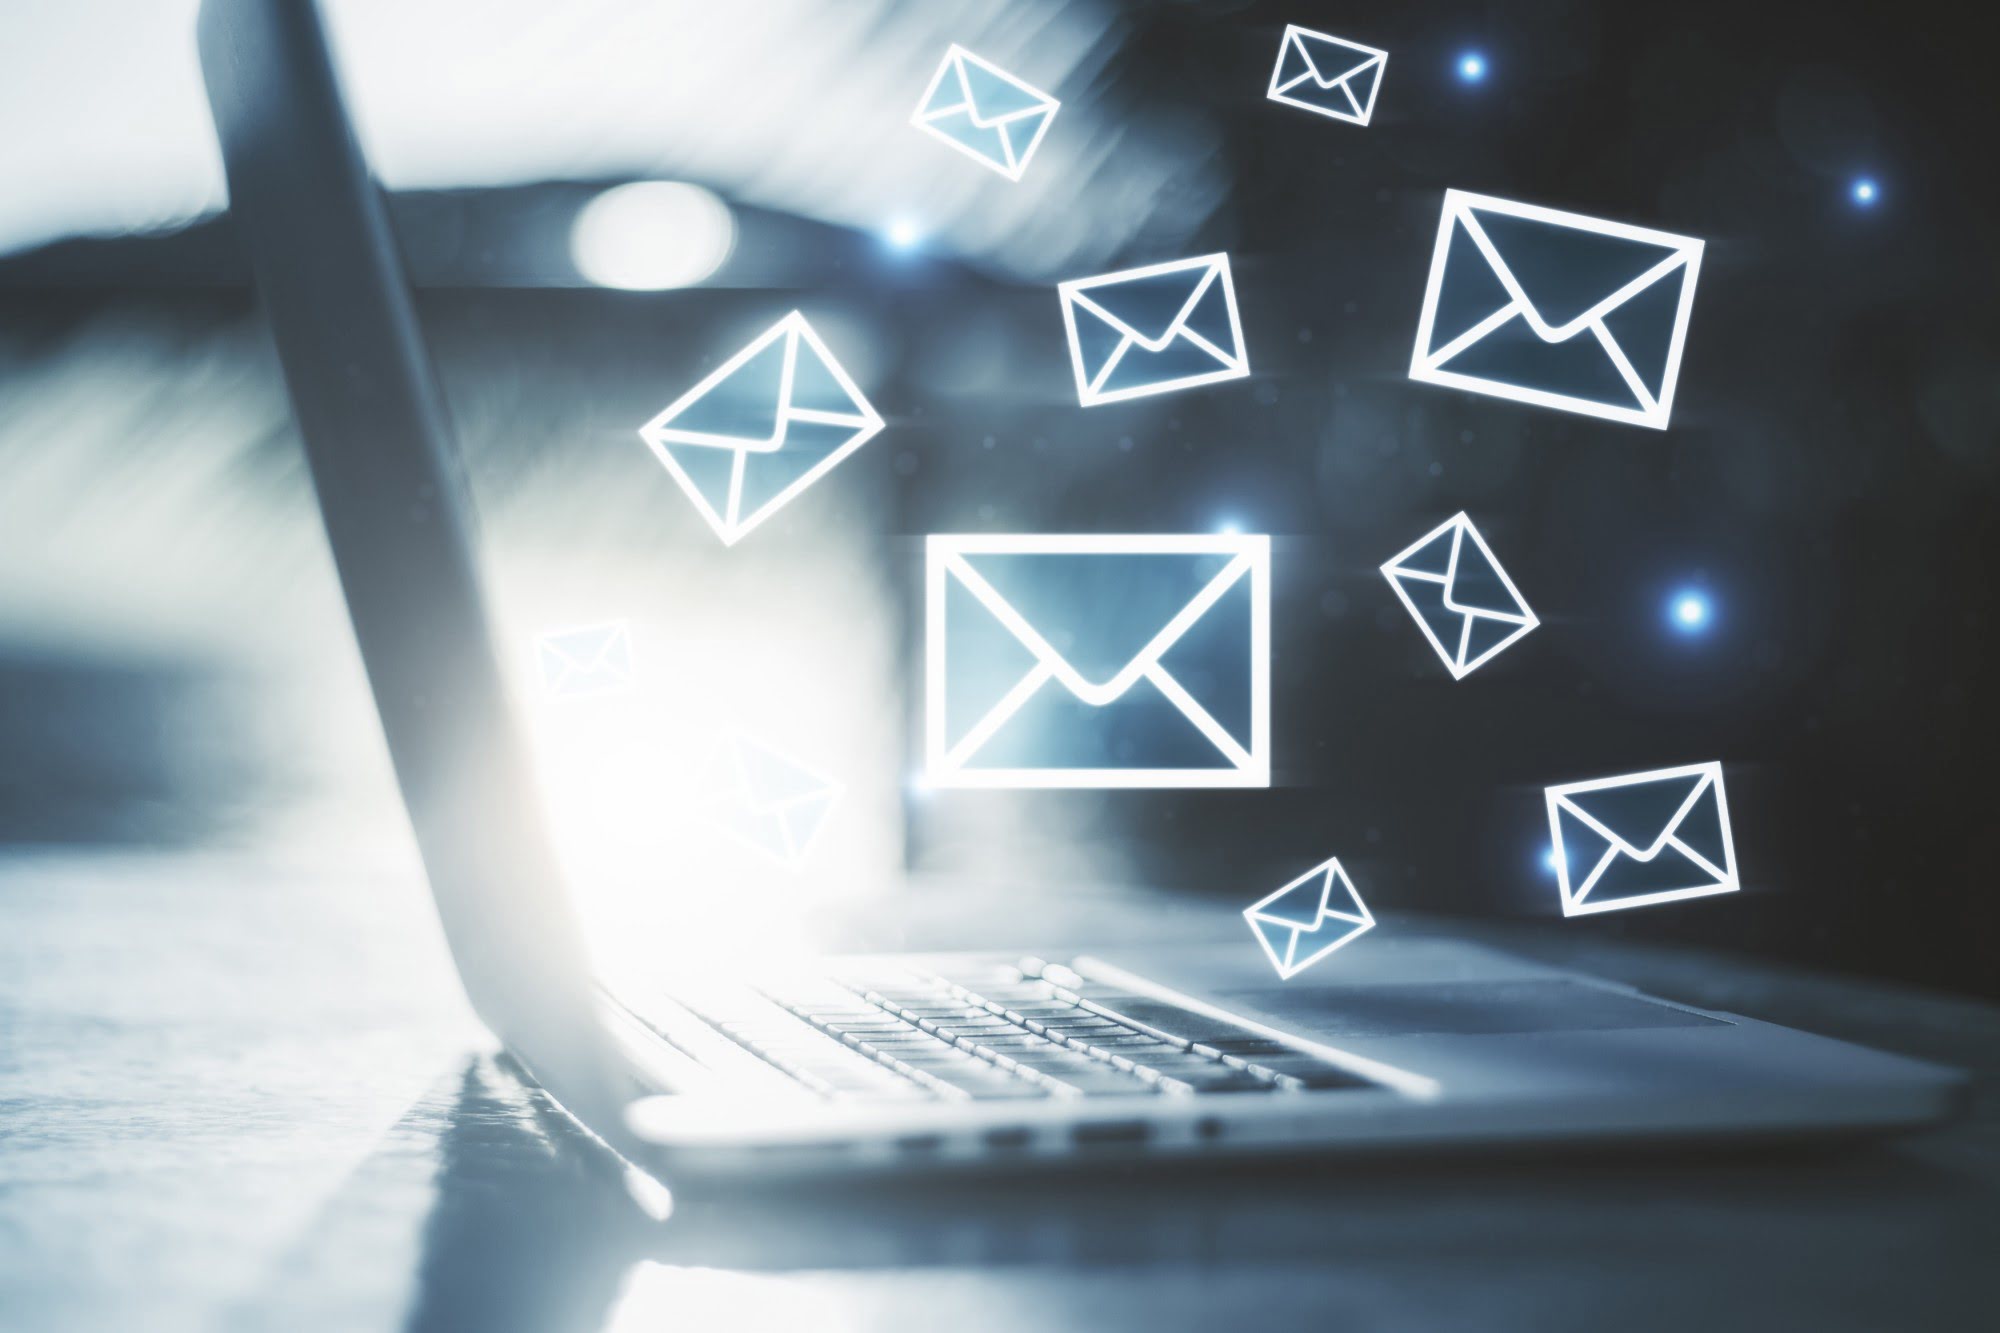 How to Find the Right Email Services and Hosting Provider